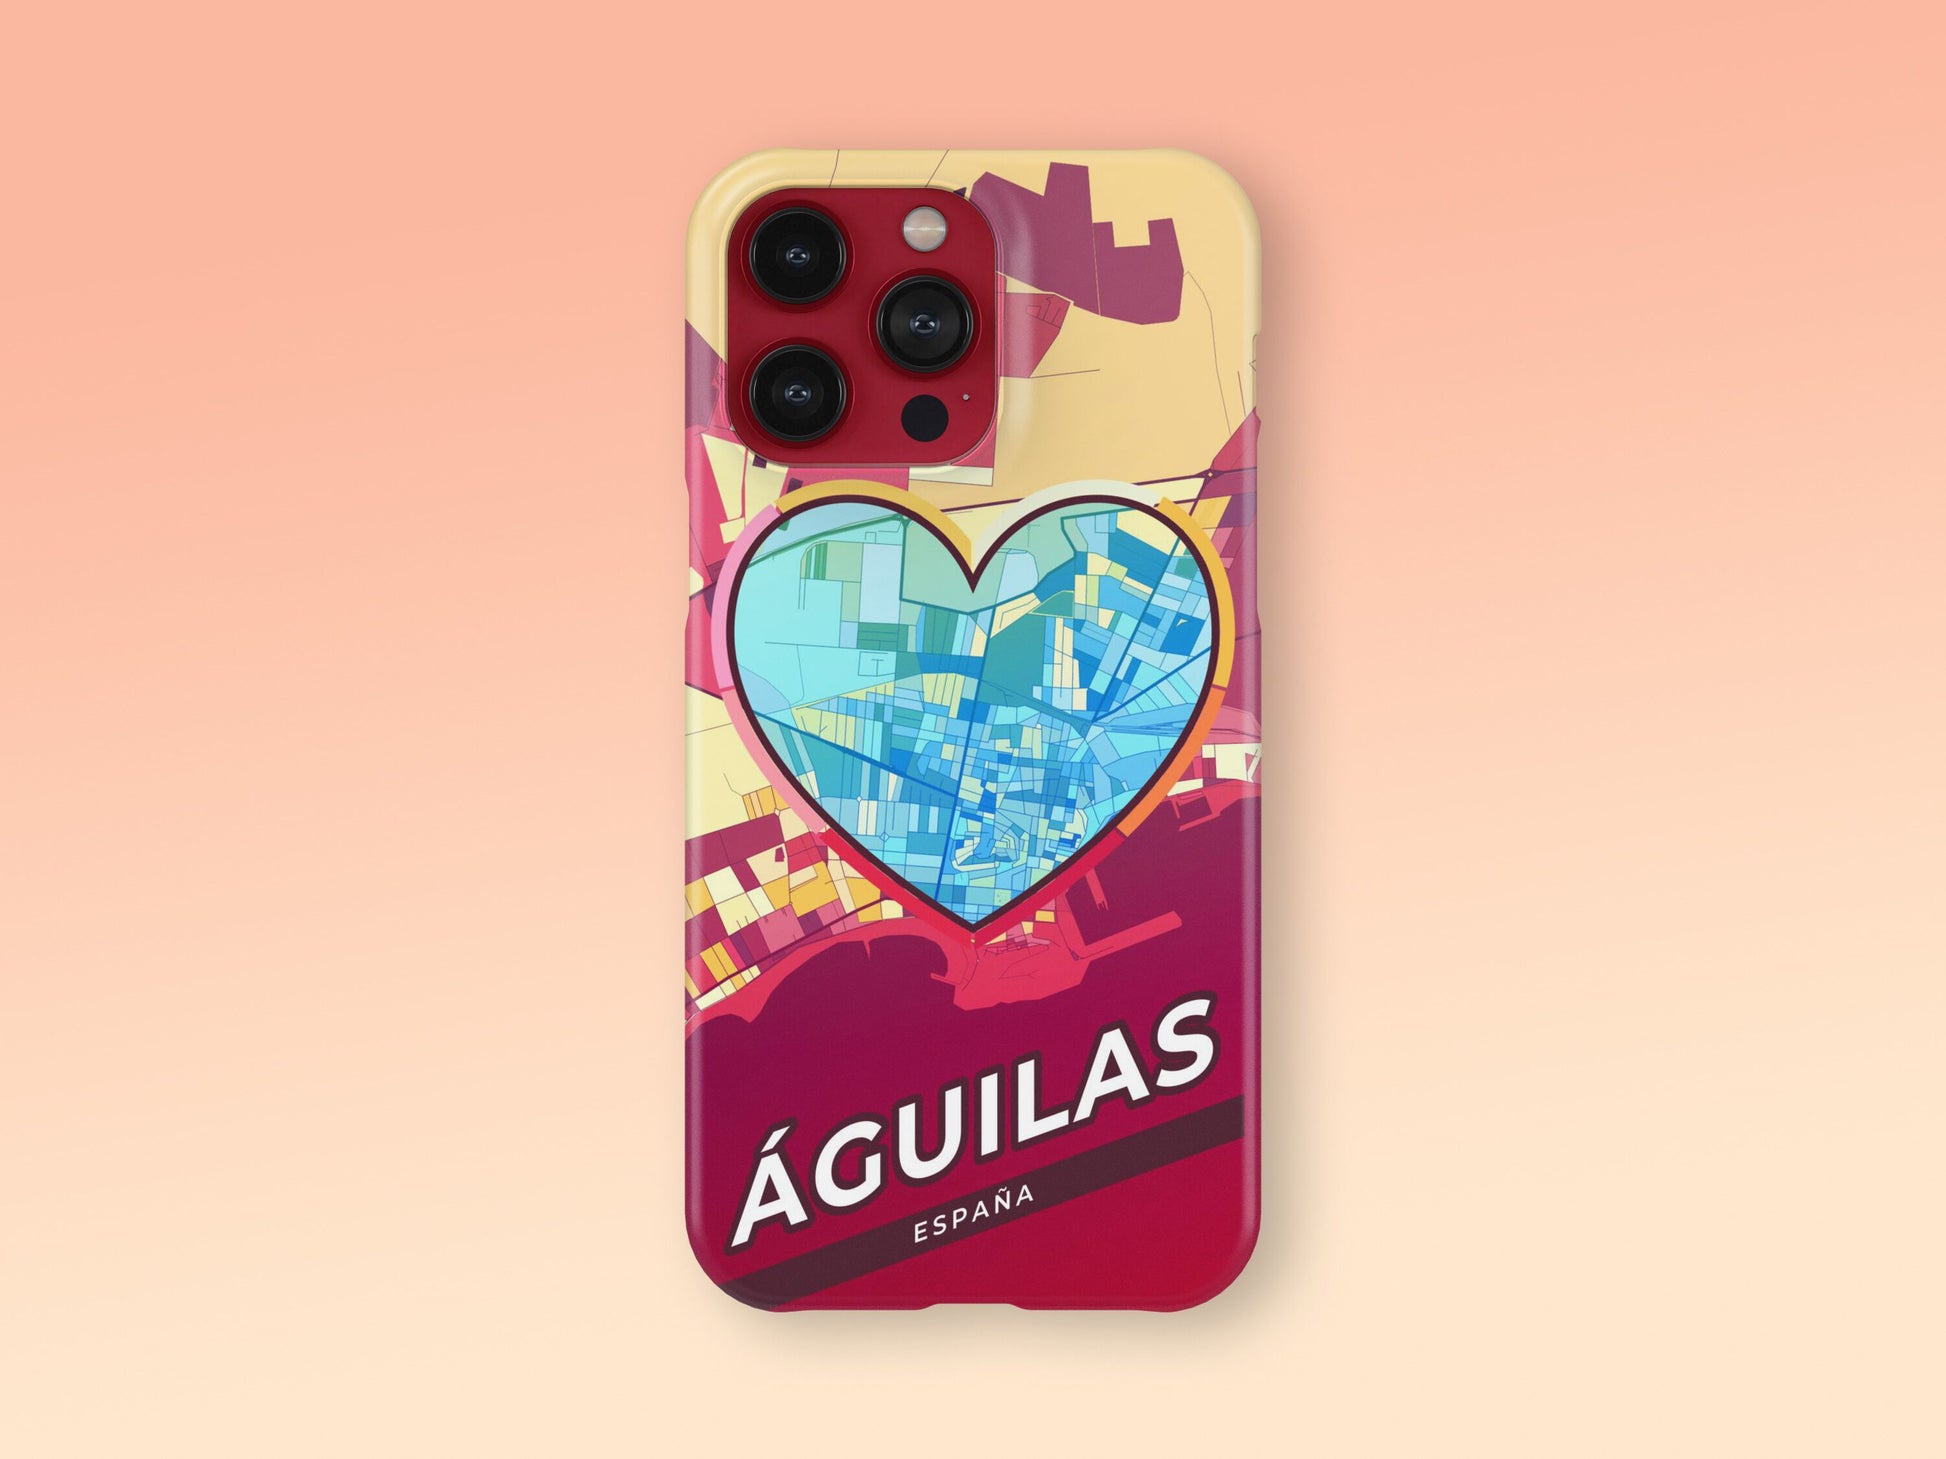 Águilas Spain slim phone case with colorful icon. Birthday, wedding or housewarming gift. Couple match cases. 2